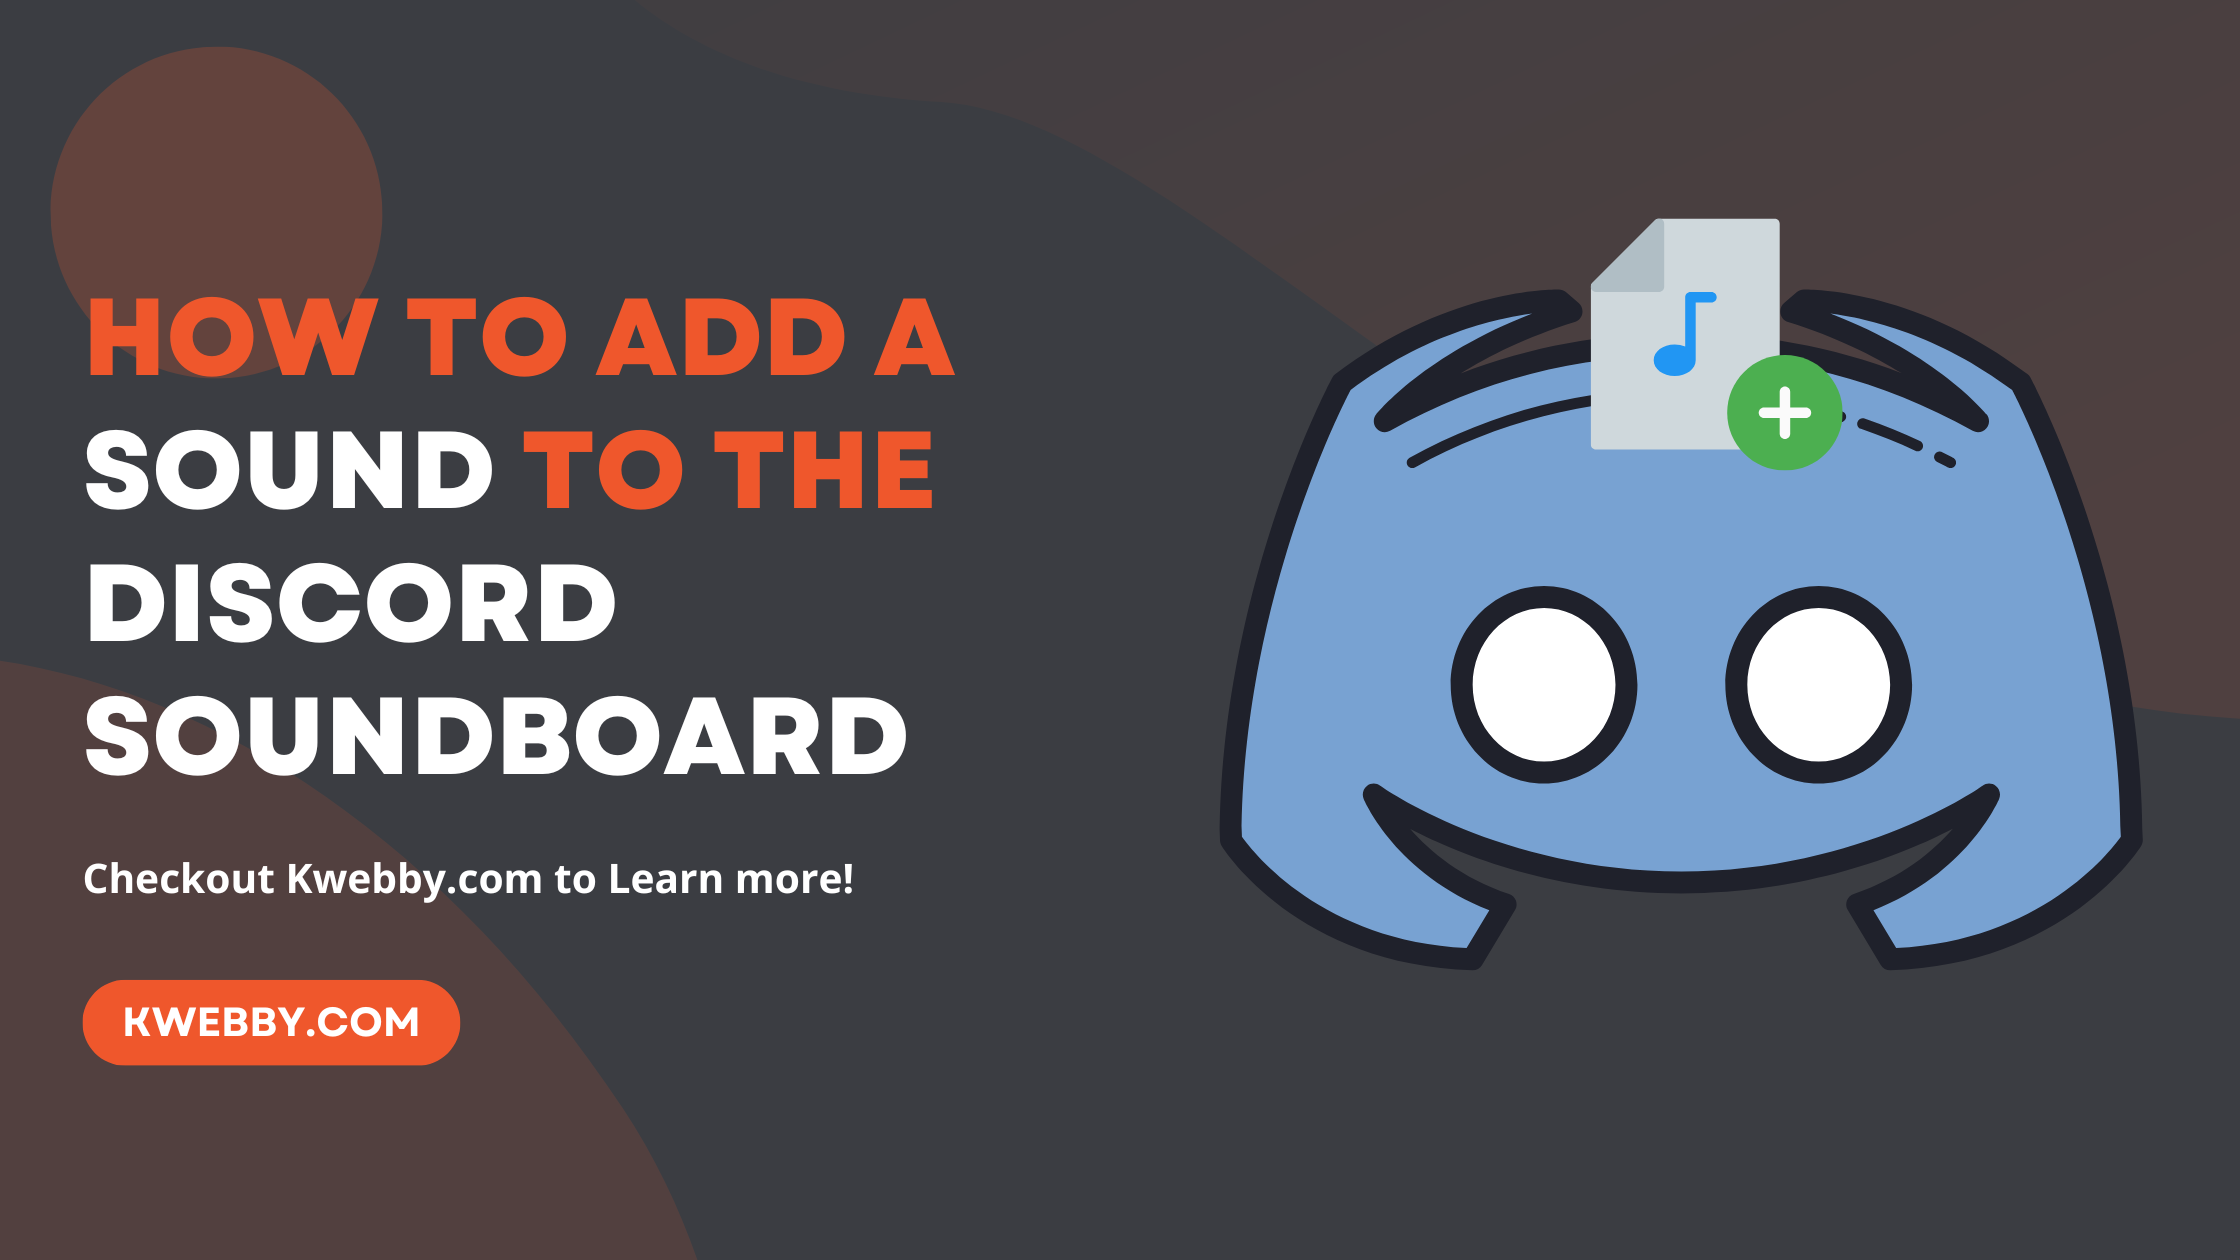 How to add a sound to the discord soundboard